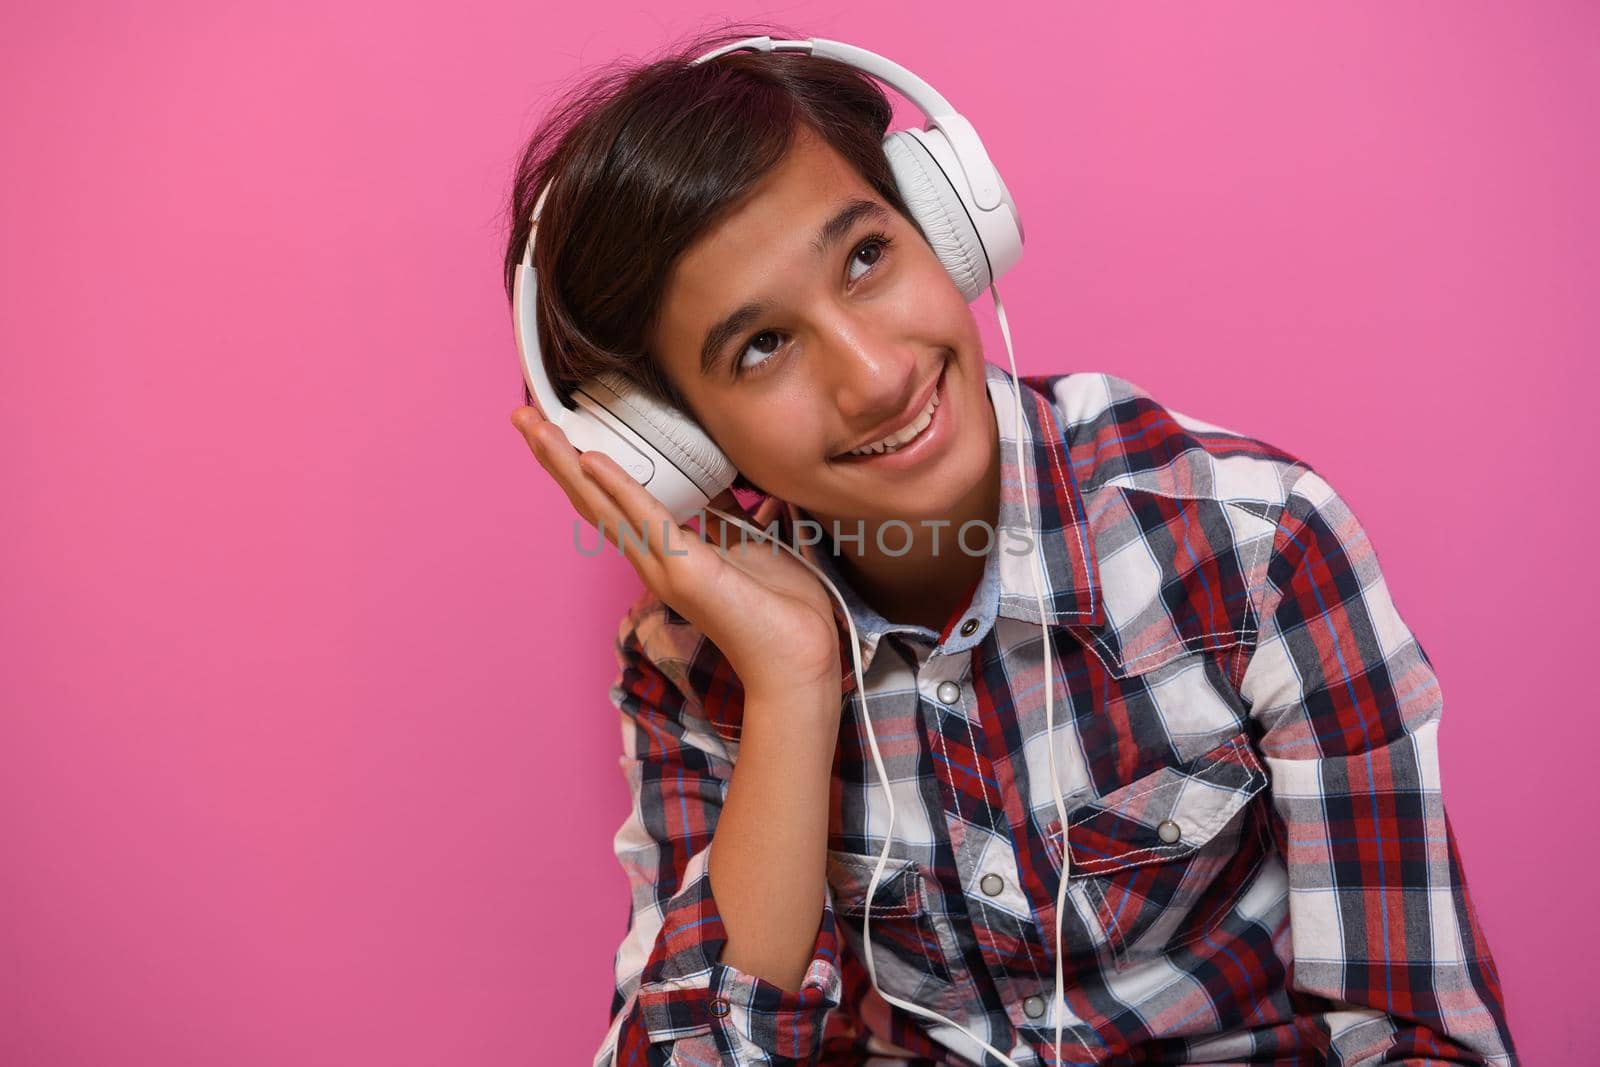 Arabic Teenage Boy Wearing Headphones And Listening To Music pink background. High quality photo